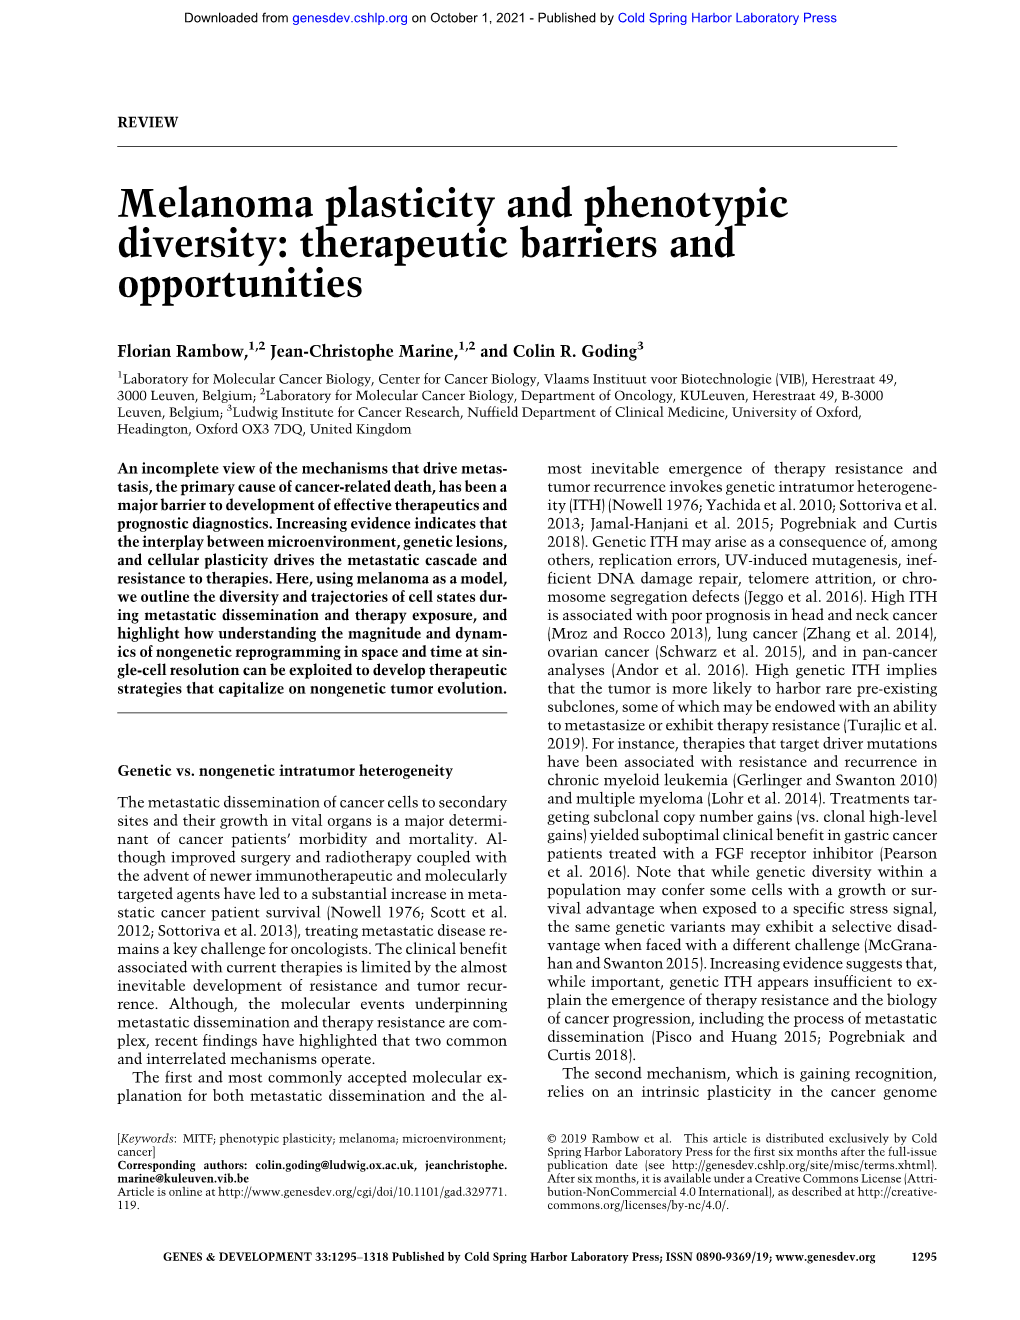 Melanoma Plasticity and Phenotypic Diversity: Therapeutic Barriers and Opportunities